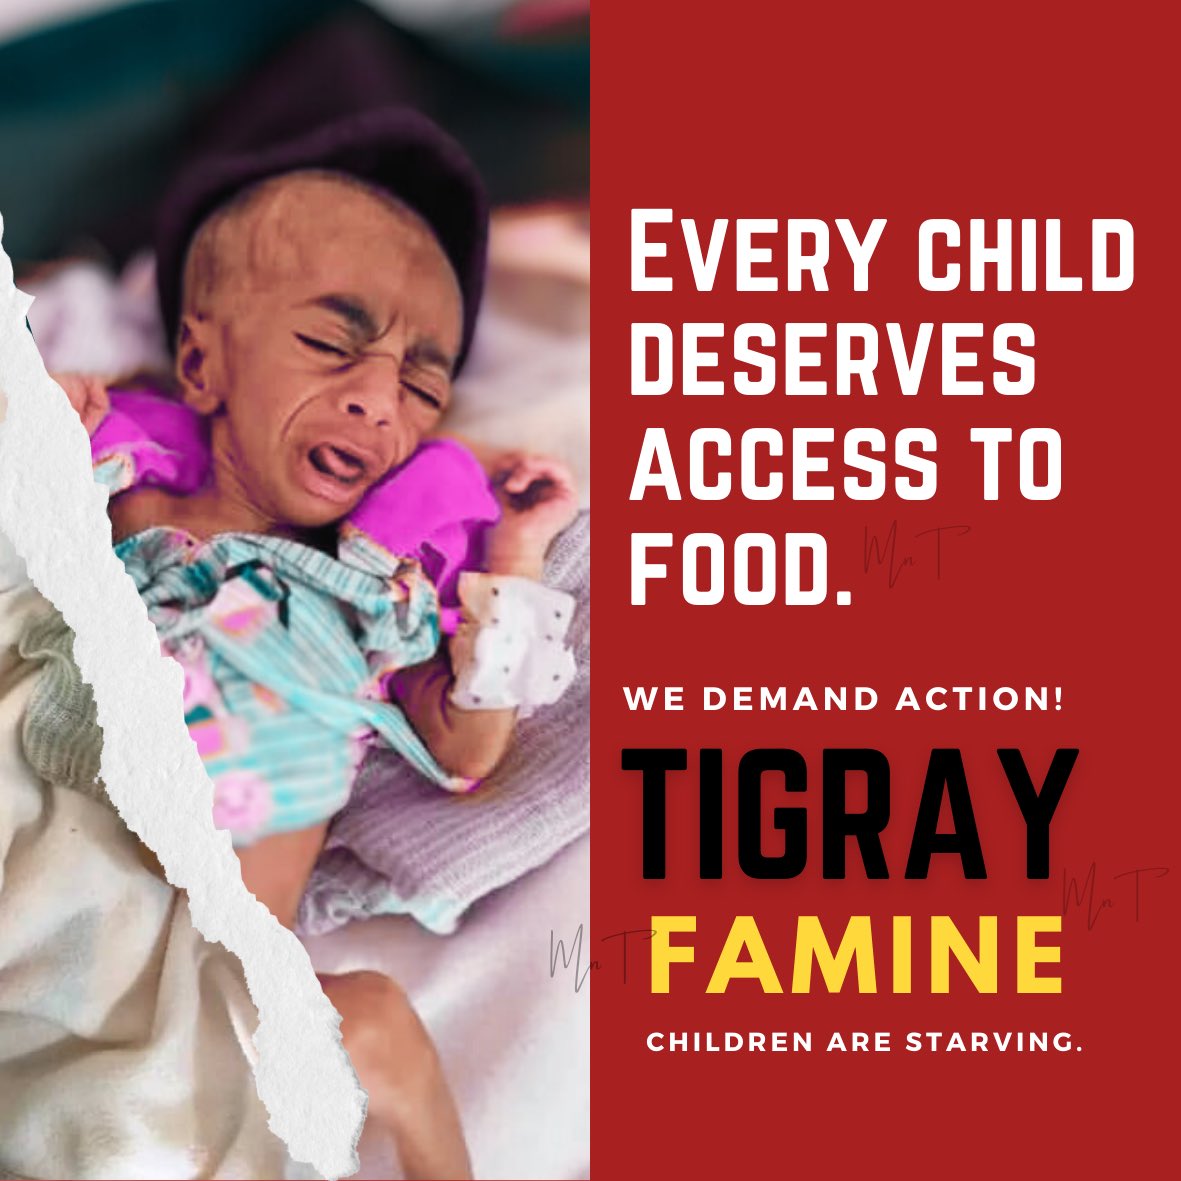 Children are starving in #Tigray, their cries for help echoing across the region. Humanitarian organizations must act now to avert this catastrophe. #TigrayFamine #Aid4Tigray #AUSummit @eu_eeas @UNICEF @SamanthaJPower @WFP_Europe @_AfricanUnion @MikeHammerUSA